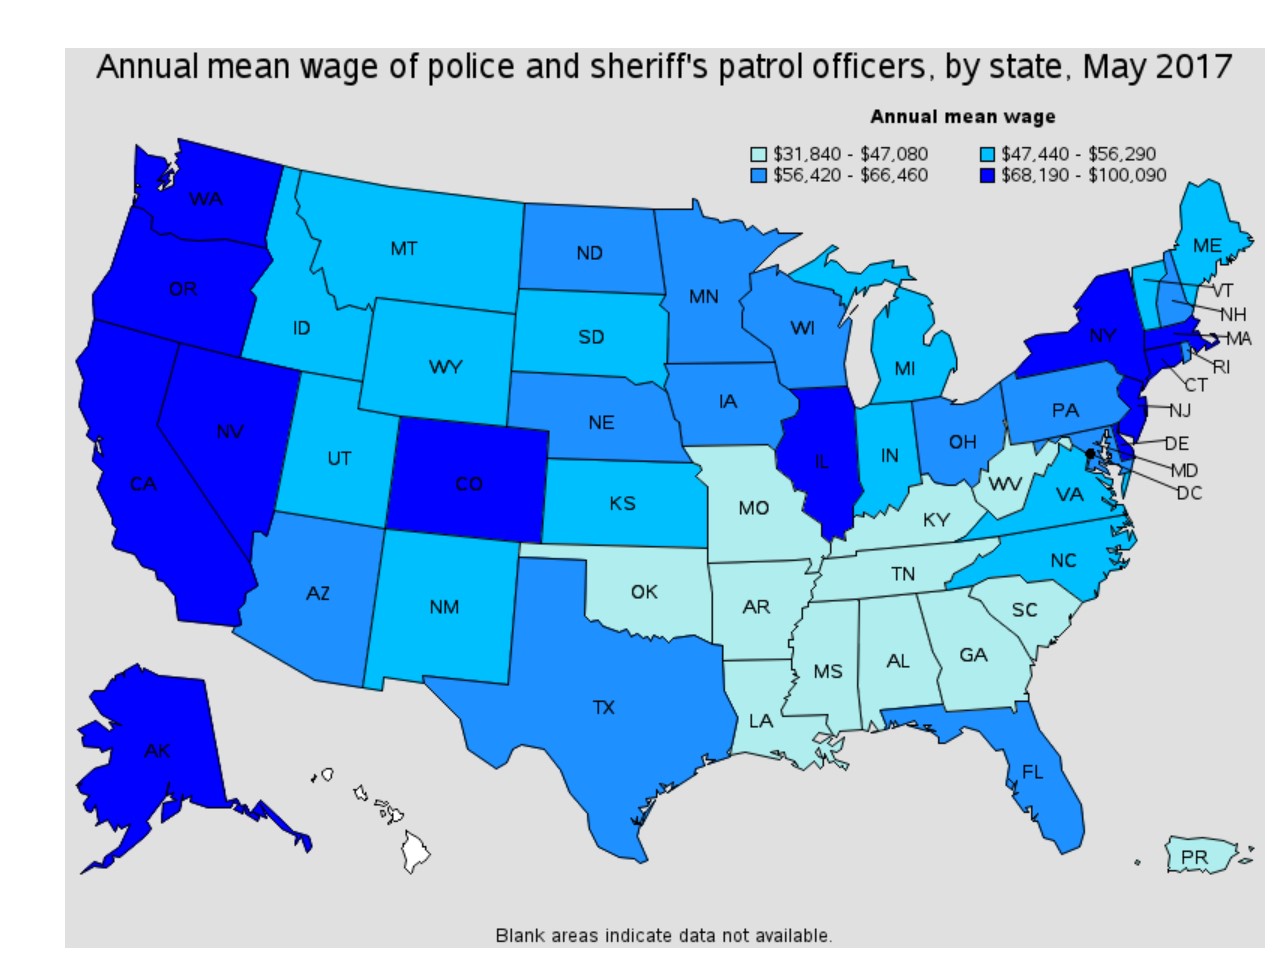 Annual mean wage of police and sheriff's patrol officers, by state, May 2017